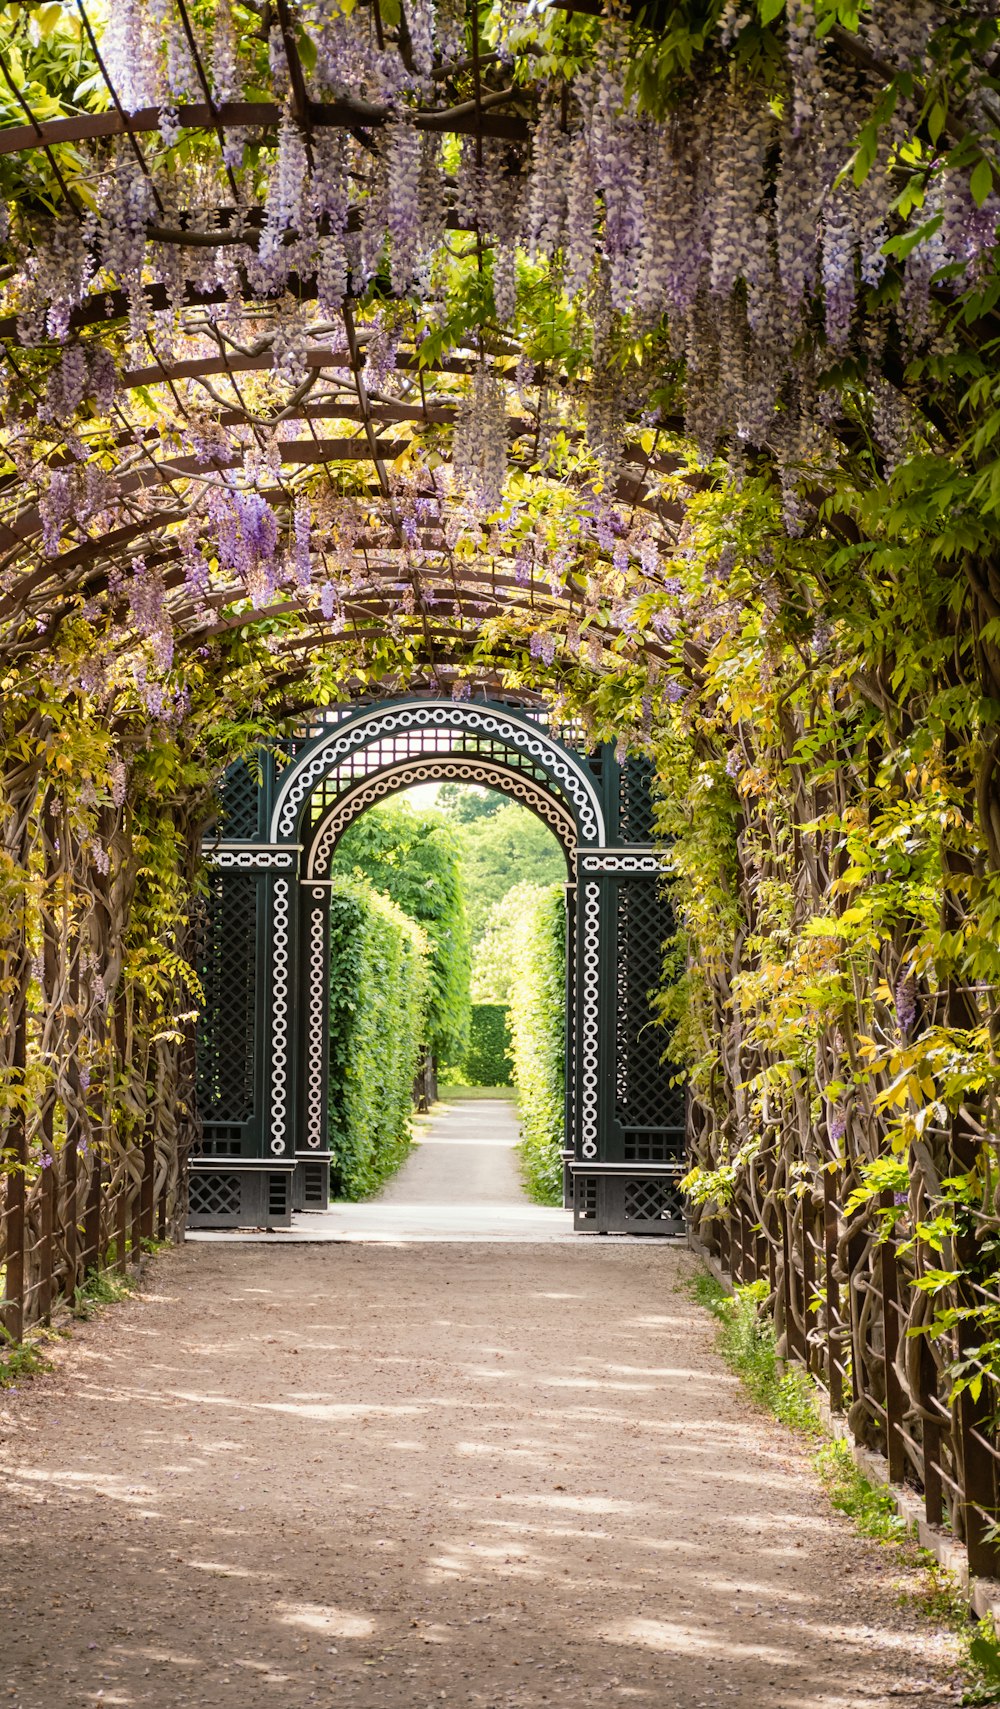 an archway with vines growing over it